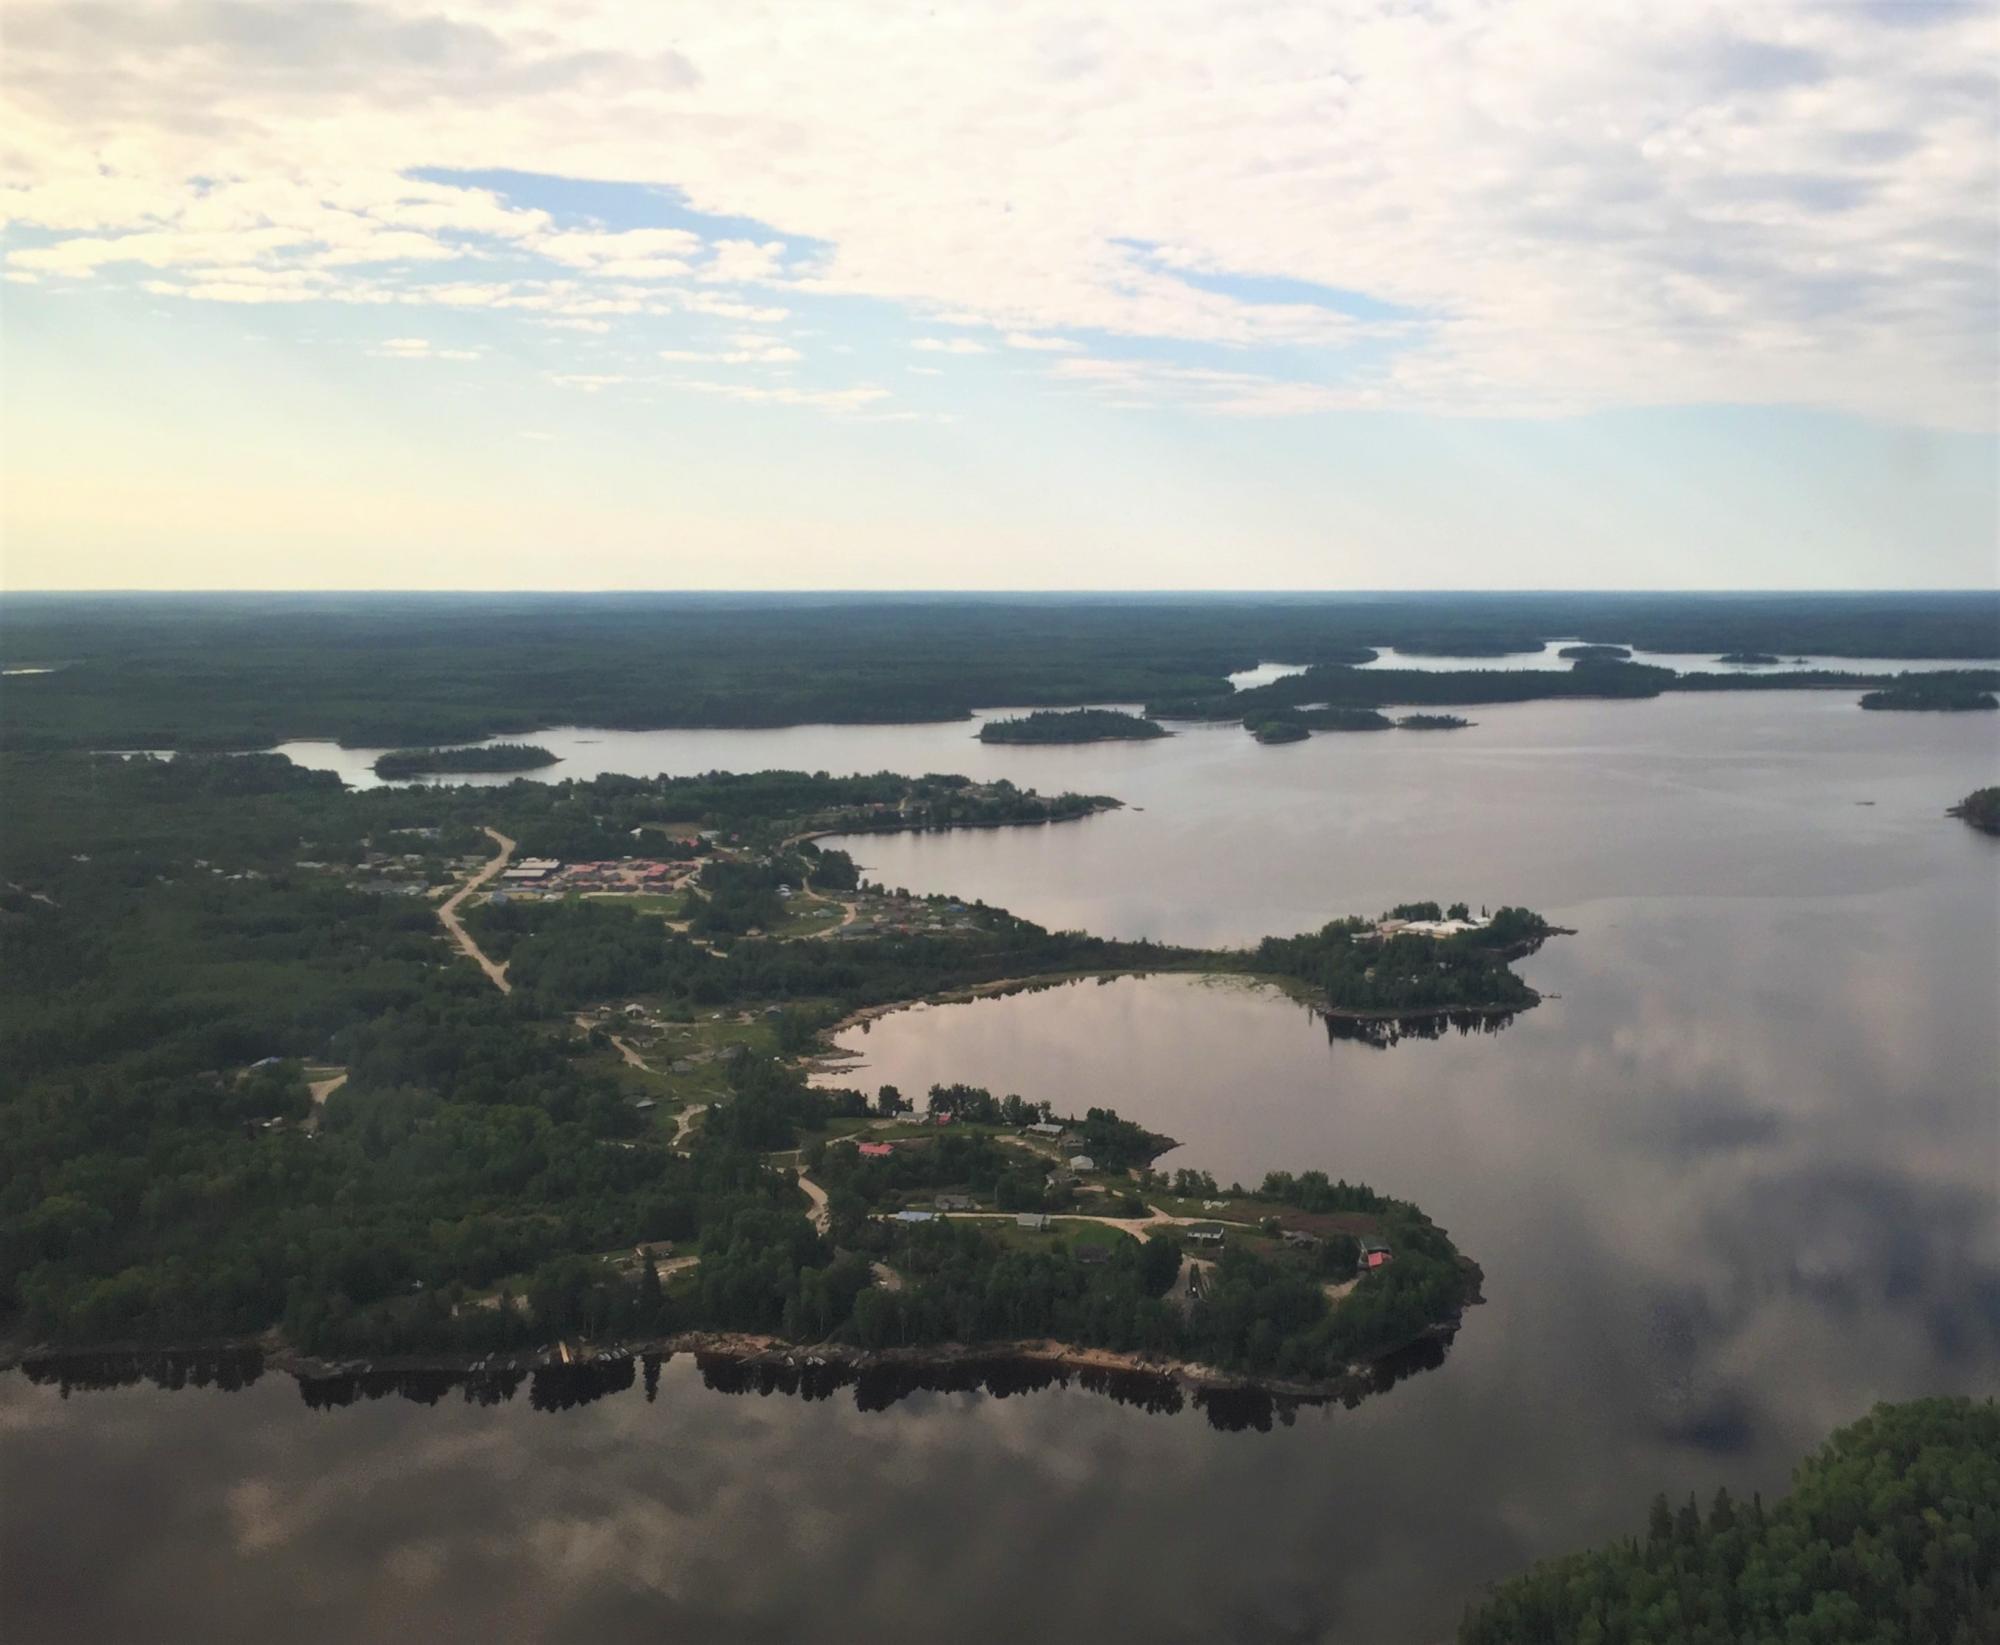 An overview perspective of a lake in northern Ontario